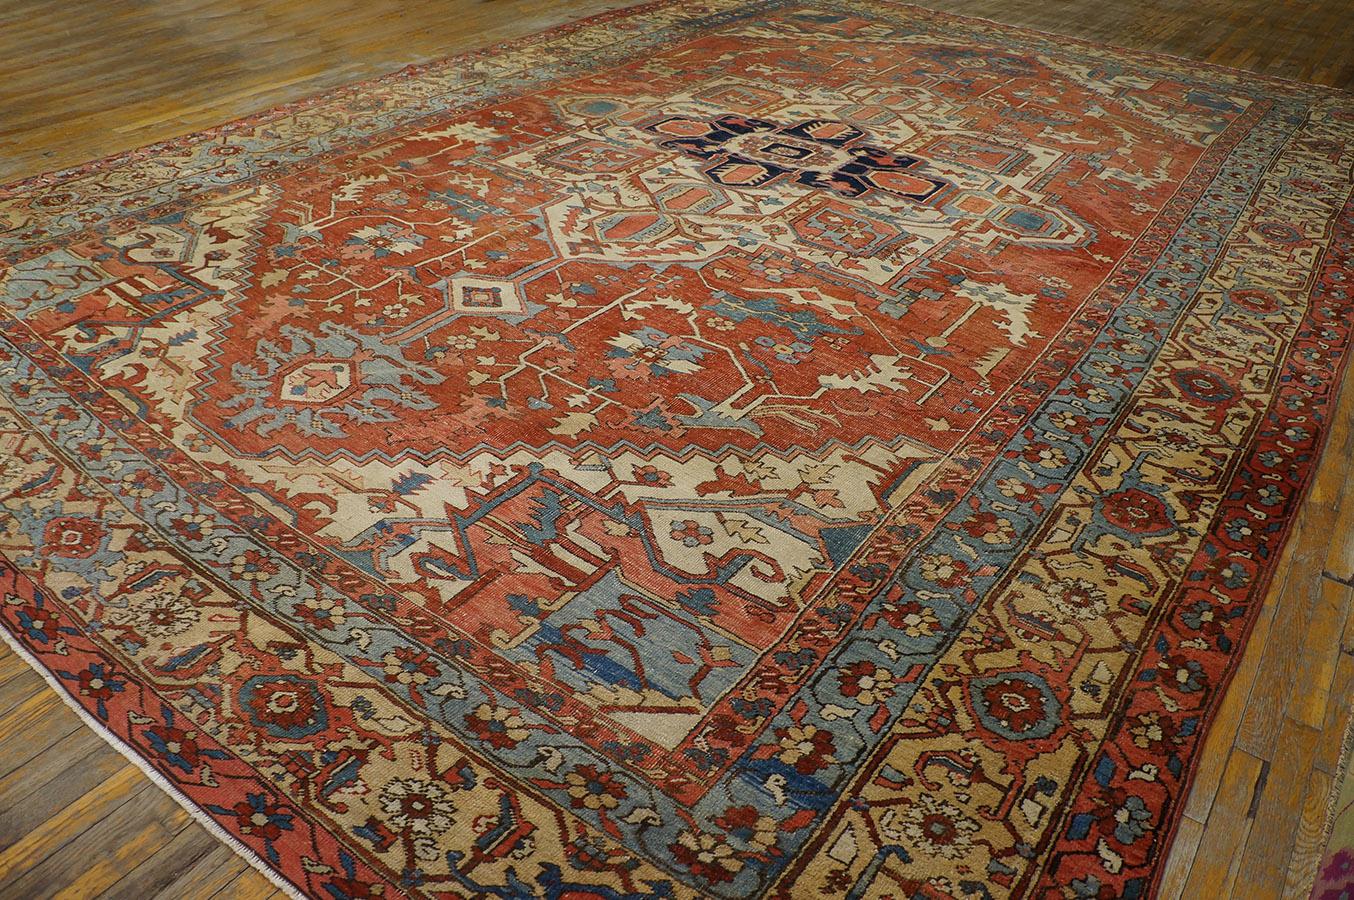 Hand-Knotted Late 19th Century Persian Serapi Carpet ( 12' x 18' - 366 x 548 cm ) For Sale